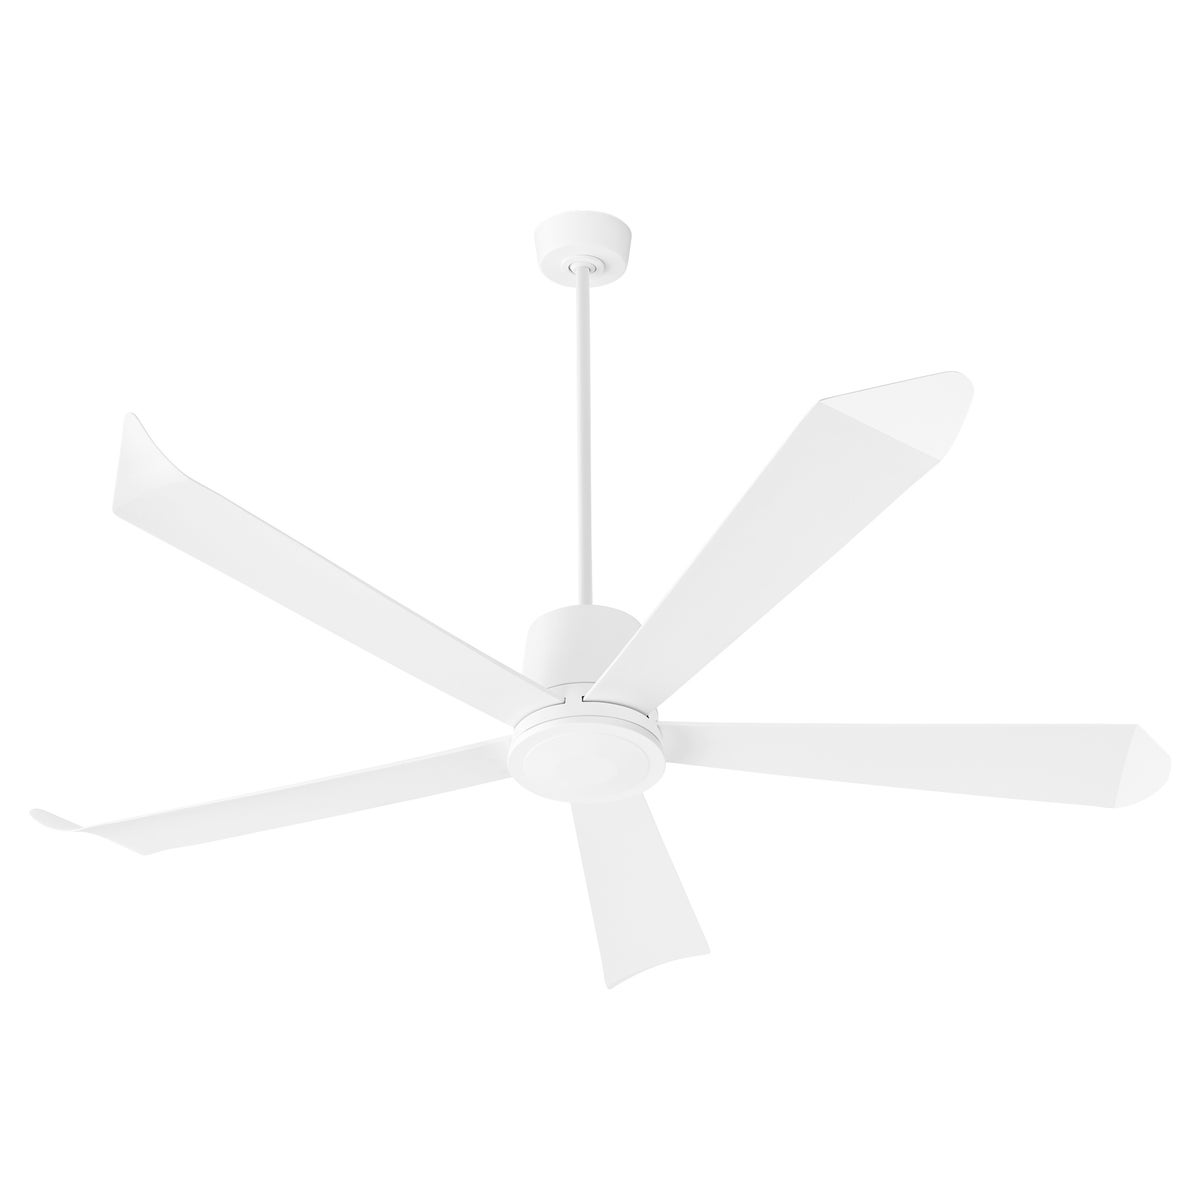 A smart ceiling fan with elongated blades and optional light kits, perfect for elevating any room. Brand: Quorum International. Motor Size: DC-165NM. Watts: 26/19/15/11/8/5. Amps: .30/.24/.20/.15/.11/.08. RPMs: 90/82/74/60/59/52. Number of Blades: 5. Blade Pitch: 13 Degrees. Certifications: UL Listed. Safety Rating: Damp Location. Finish: Aged Brass, Matte Black, Satin Nickel, Studio White. Dimensions: 15"H x 72"W. Warranty: Limited Lifetime.